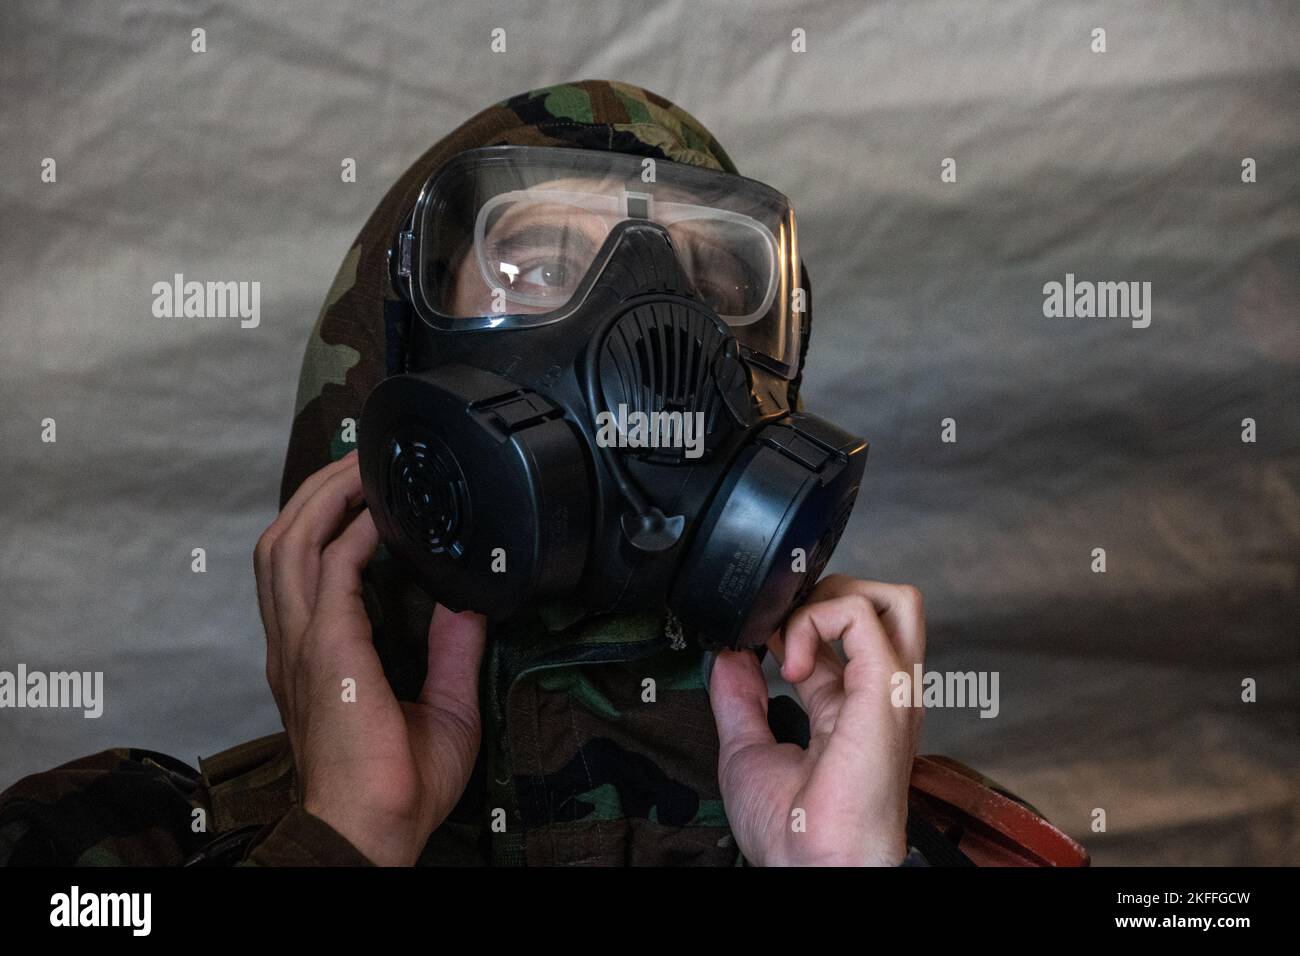 A U.S. Air Force 509th Bomb Wing Security Forces member checks equipment during a Chemical, Biological, Radiological, Nuclear exercise at Whiteman Air Force Base, Missouri, Sept. 14, 2022. Airmen participate in a CBRN and other training exercises to deter and win against adversaries. Stock Photo